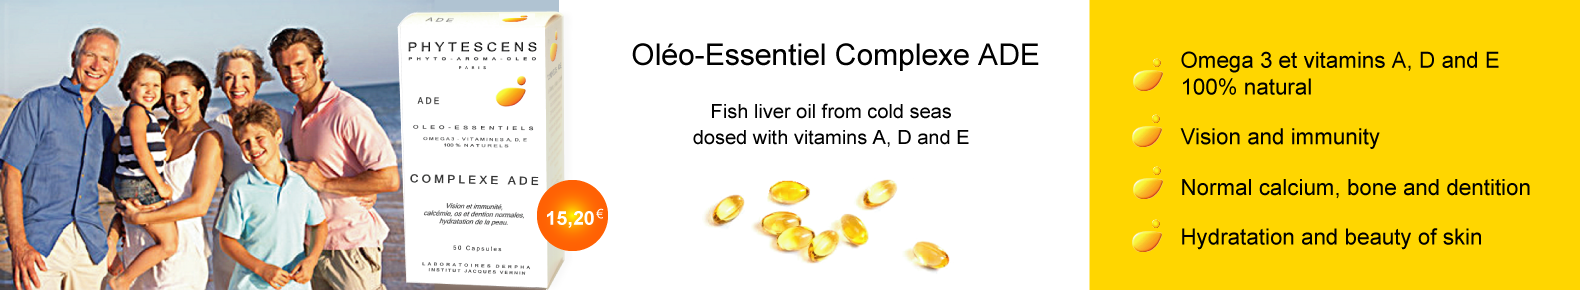 cod liver oil garateed in vitamines A D and E